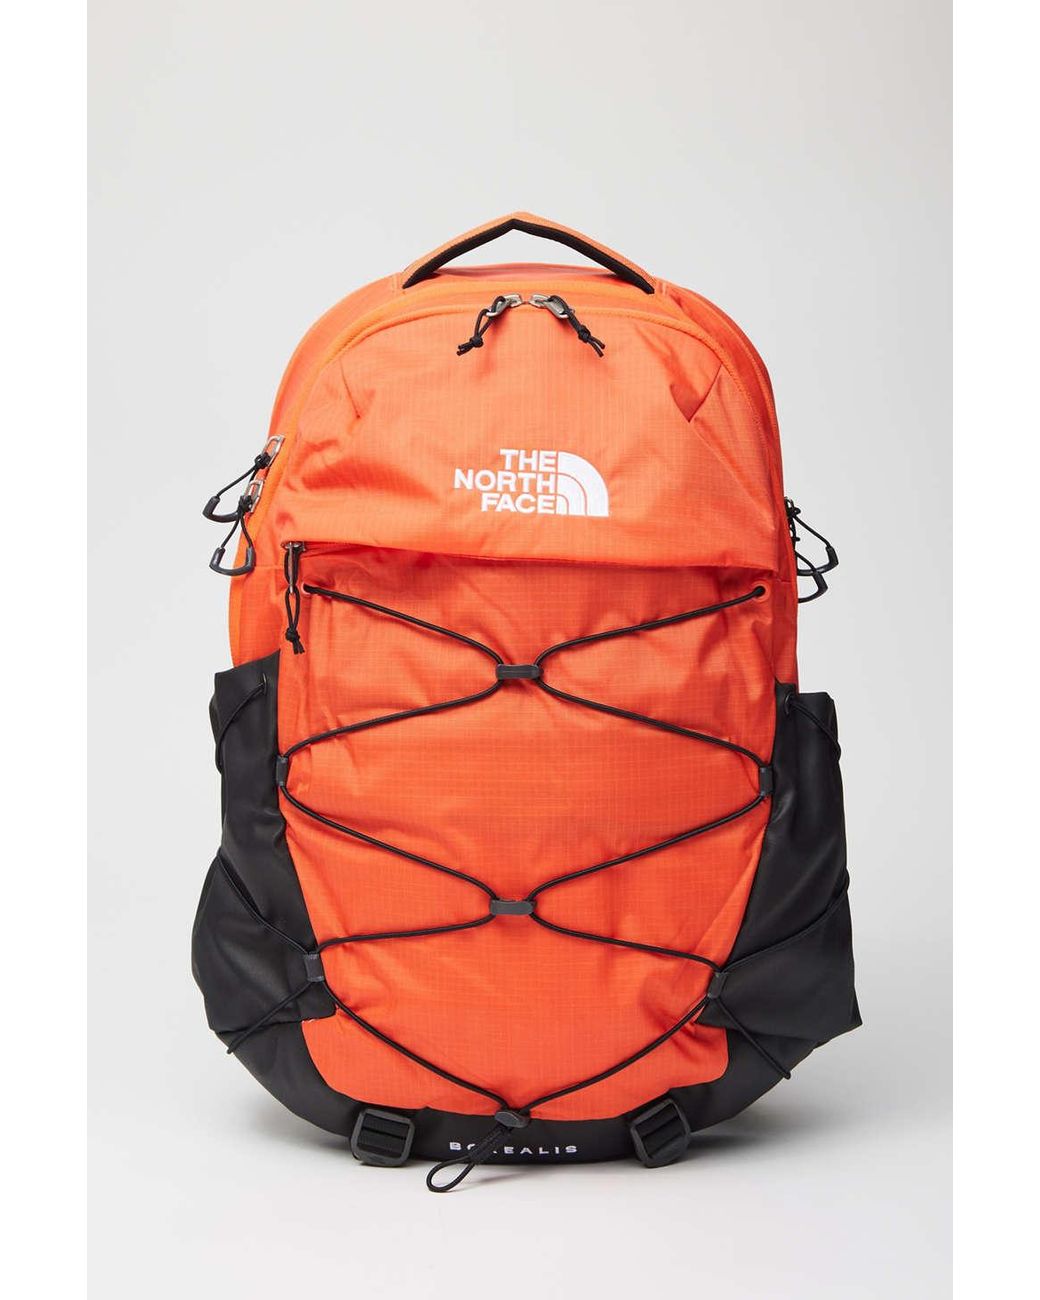 The North Face Borealis Backpack In Dark Orange At Urban Outfitters for Men  | Lyst